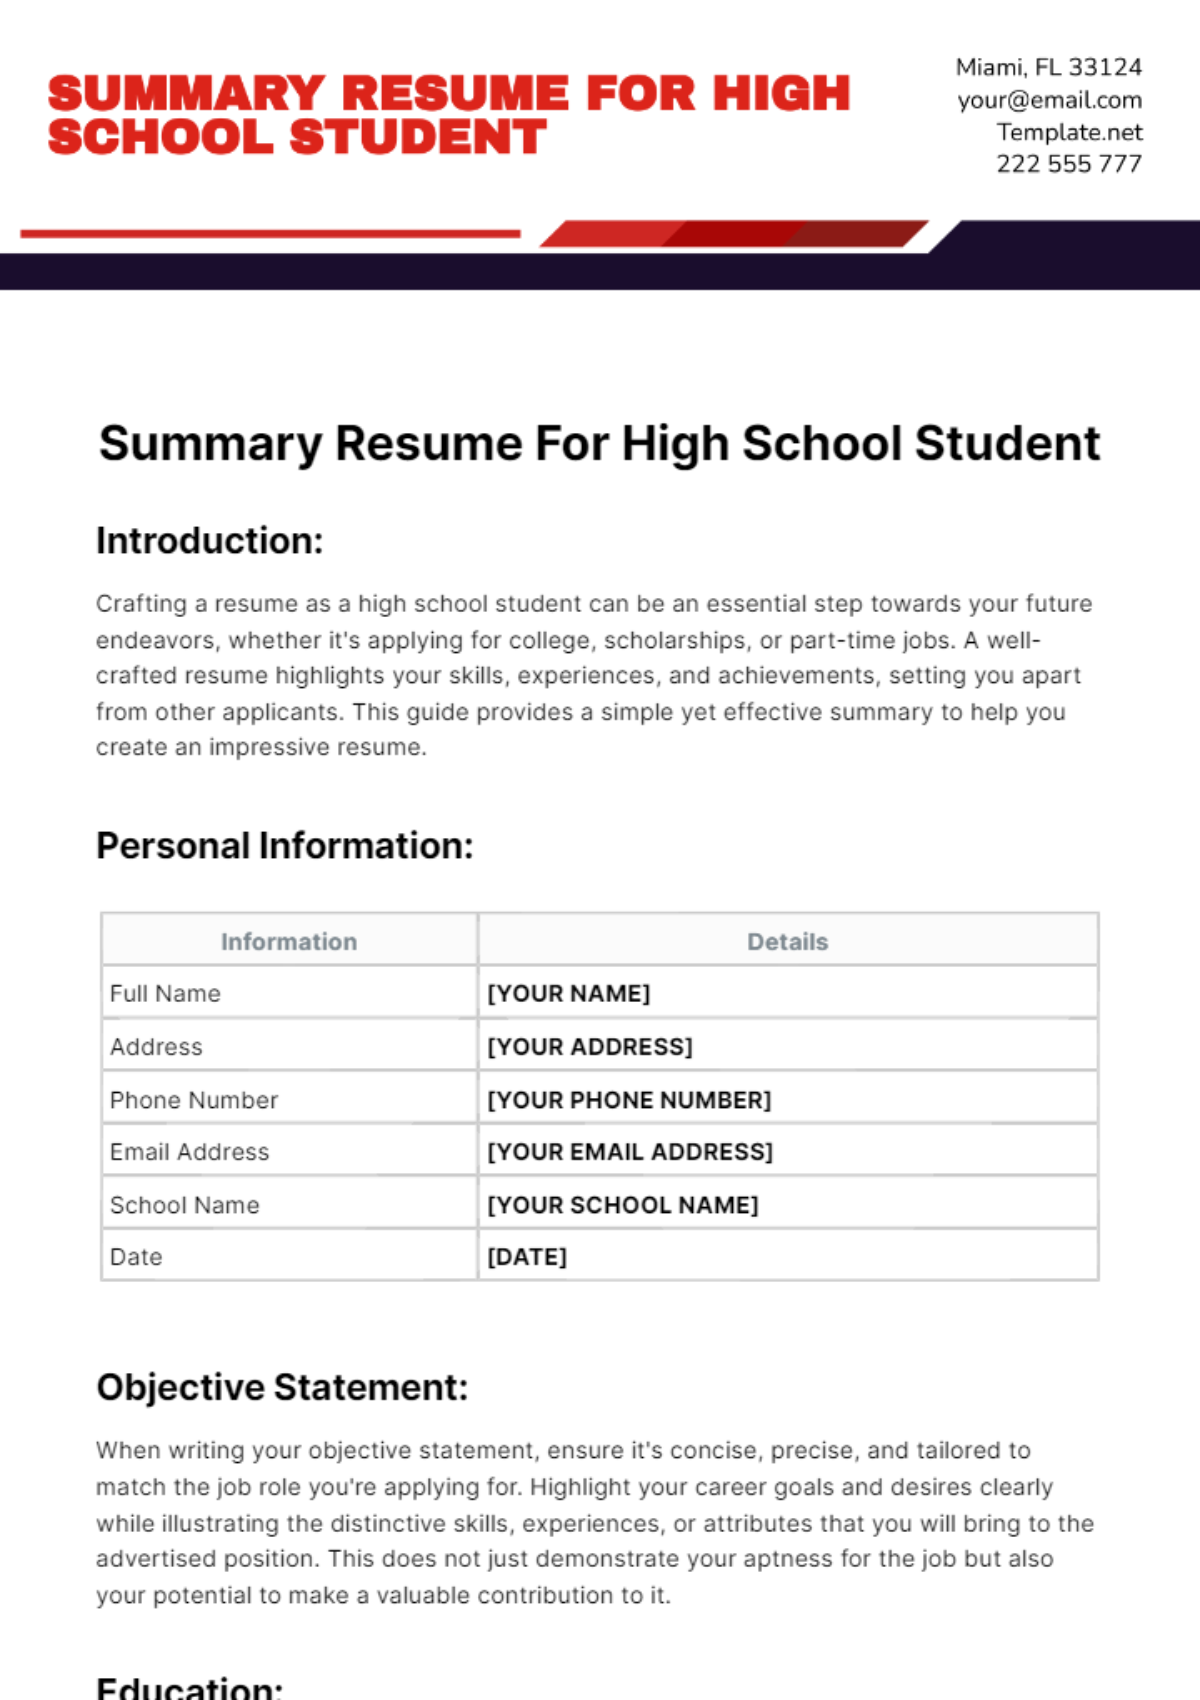 Summary Resume For High School Student Template